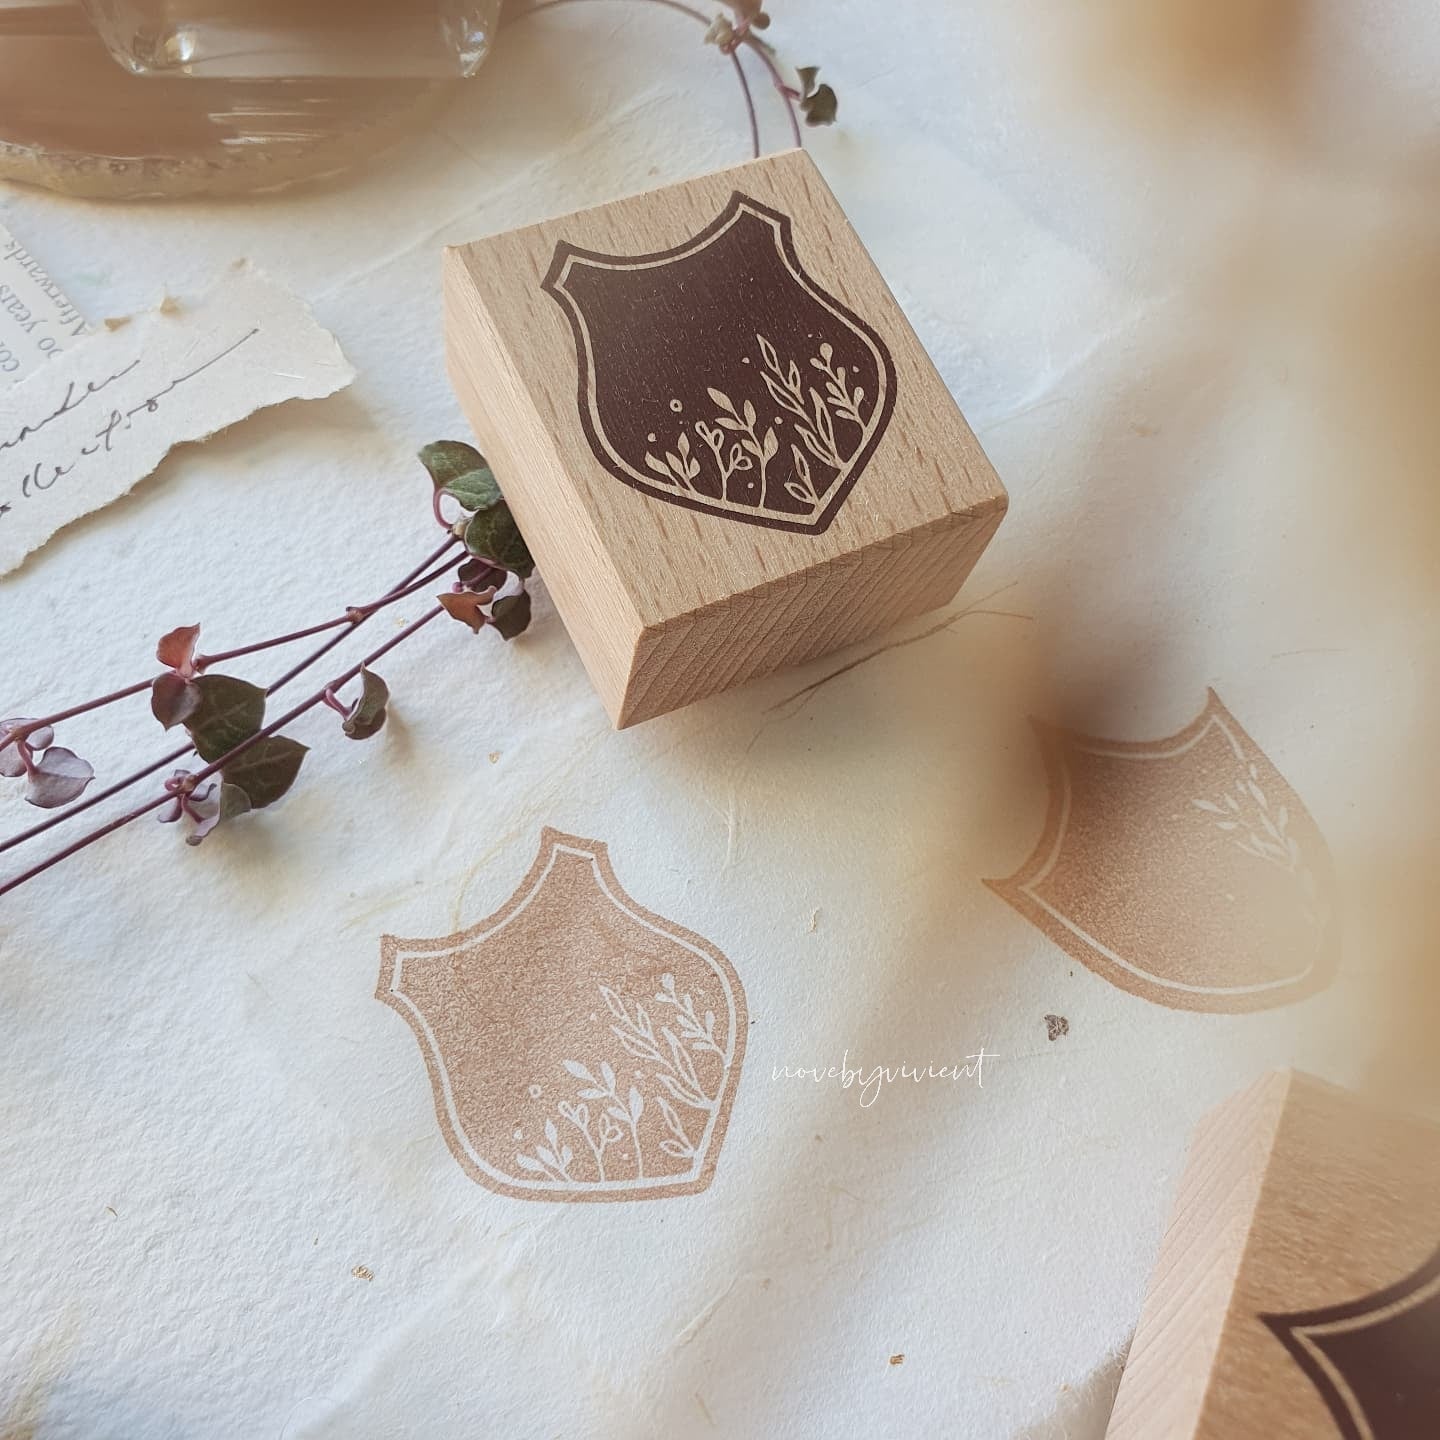 Nove {Beyond} Collection Rubber Stamps